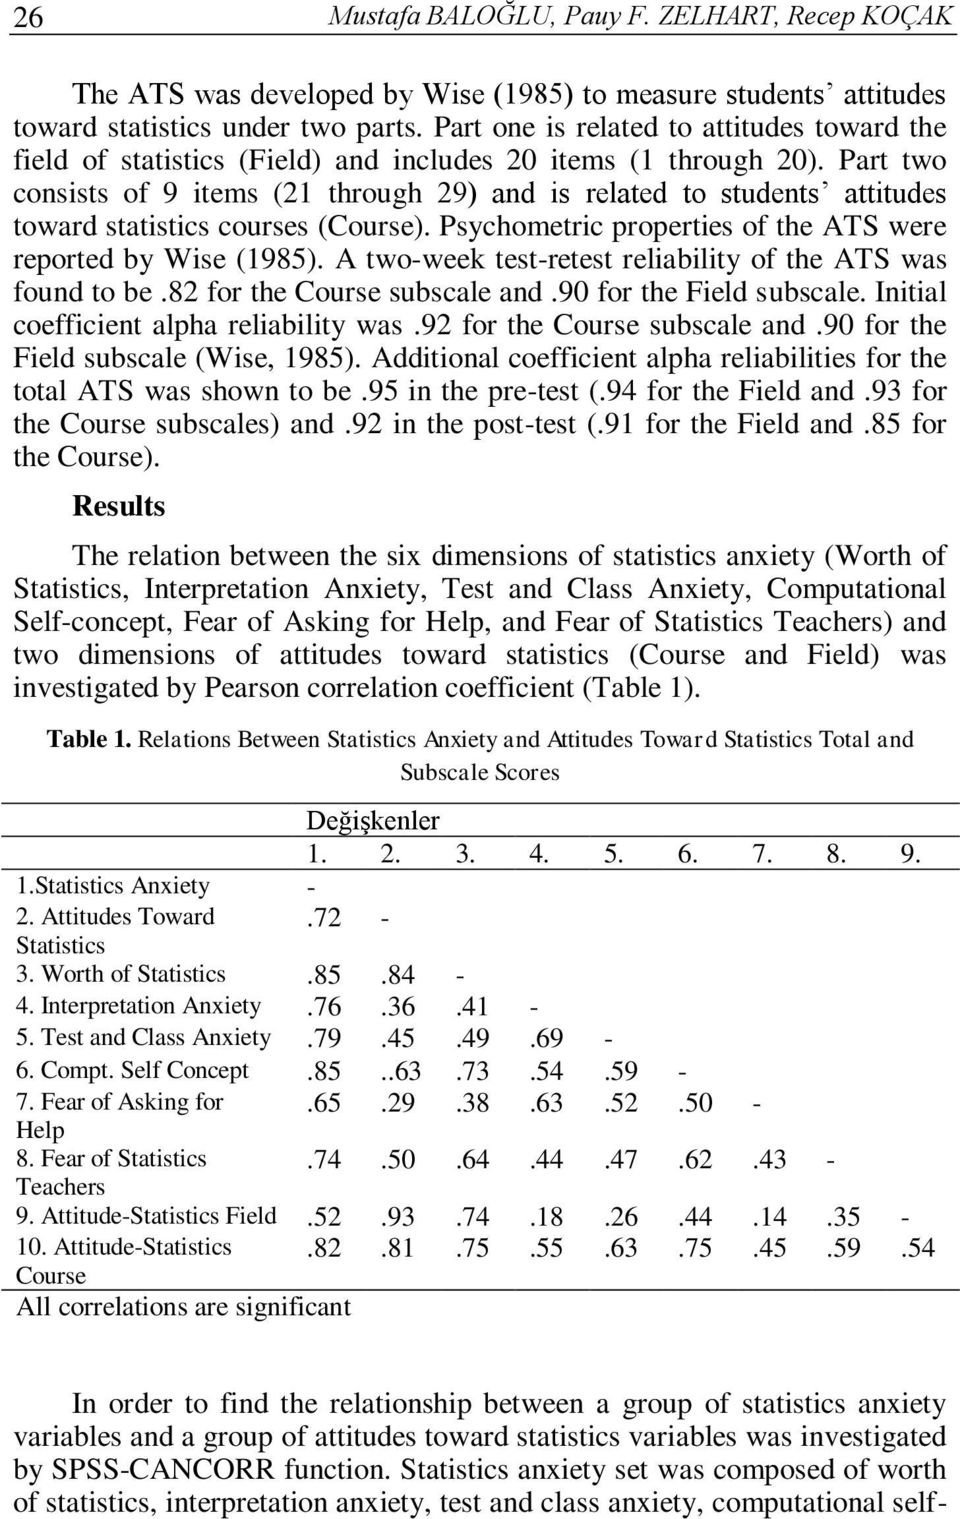 Part two consists of 9 items (21 through 29) and is related to students attitudes toward statistics courses (Course). Psychometric properties of the ATS were reported by Wise (1985).